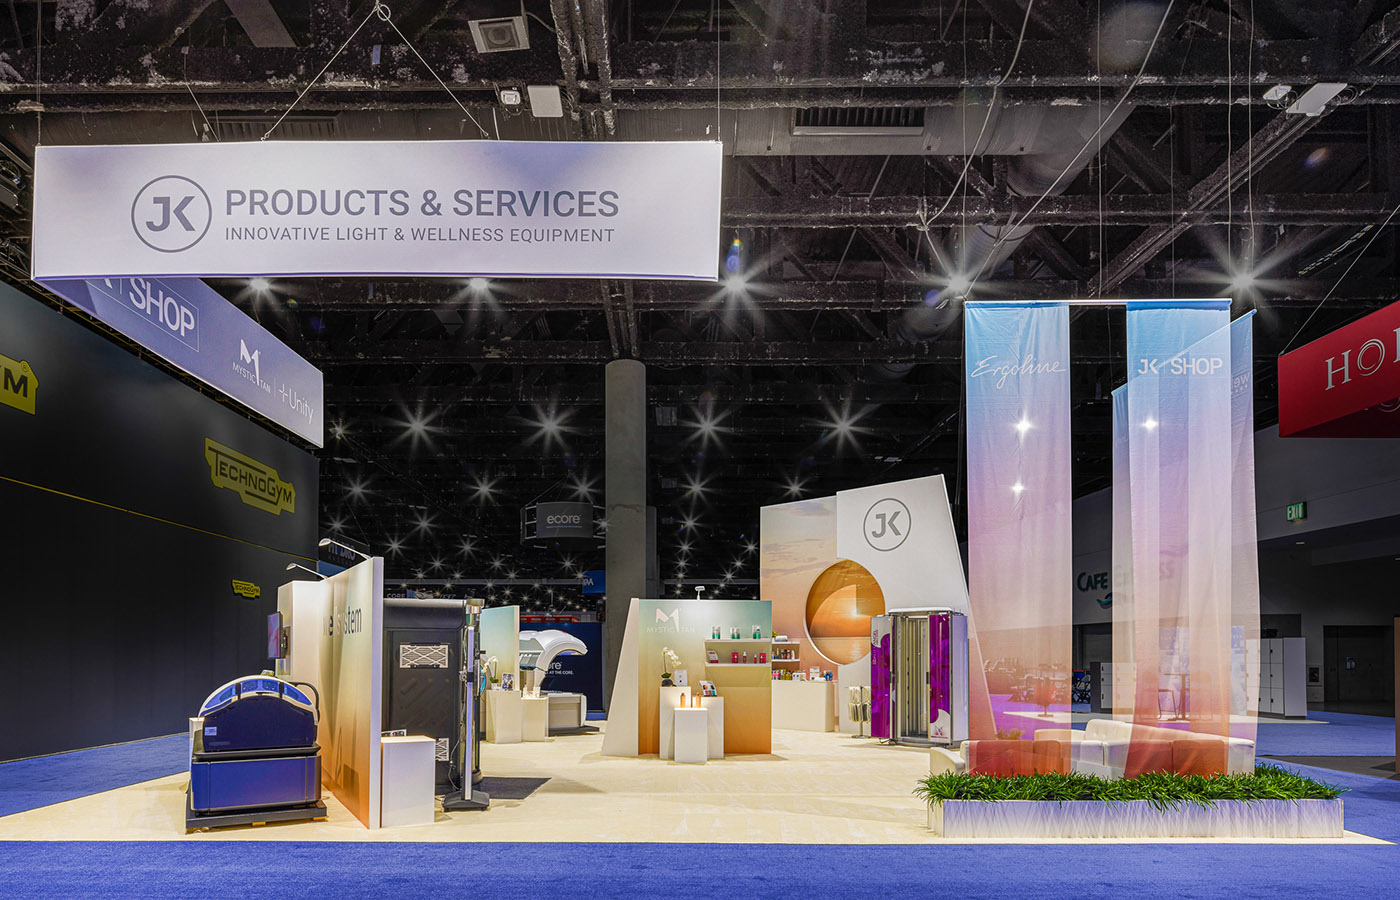 NRA 2021 Tradeshow Displays & Event Services